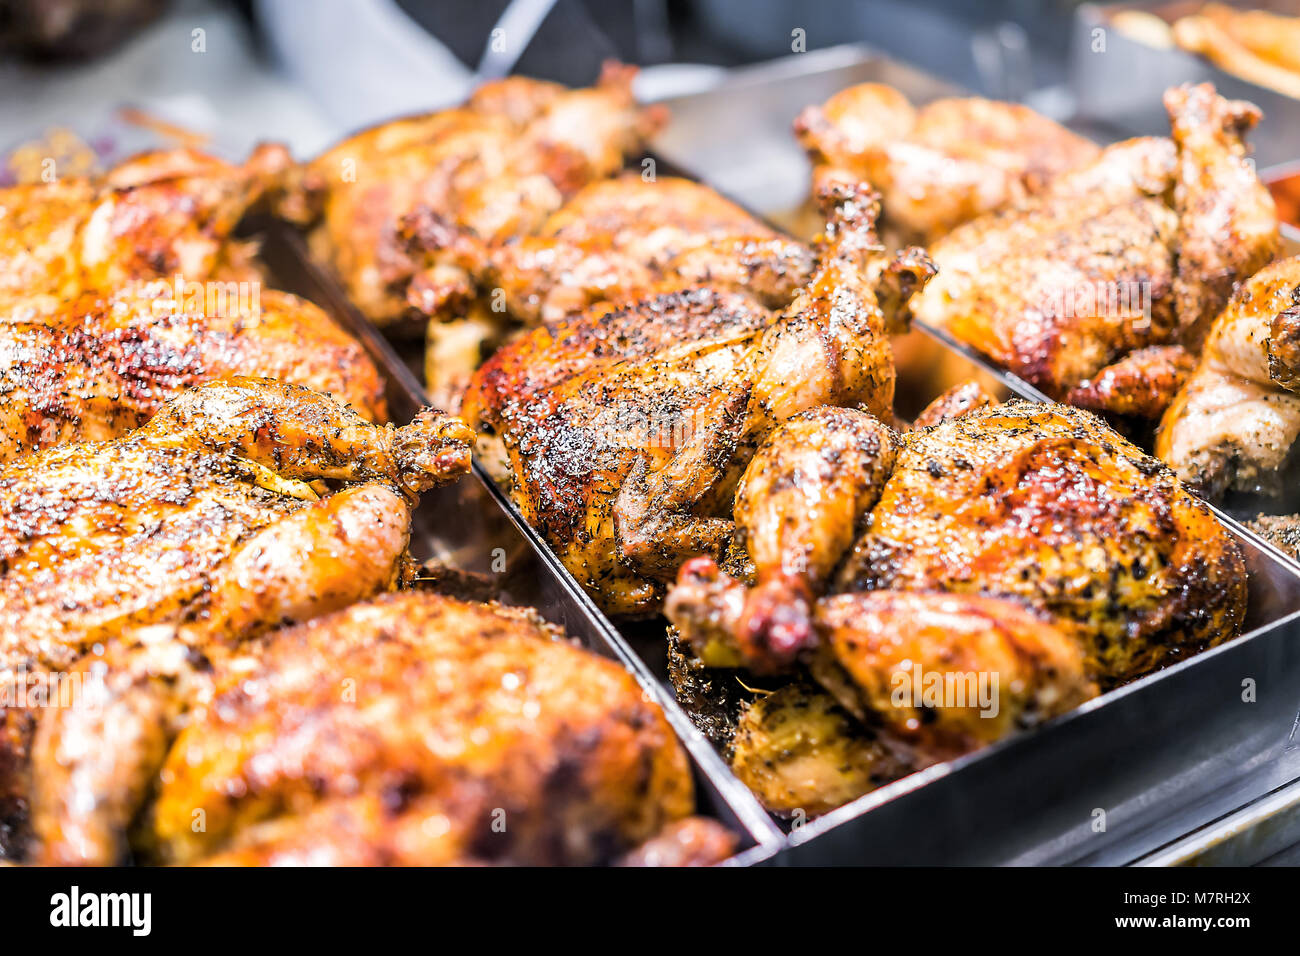 Many whole chicken roasted closeup on tray in deli display store shop grocery brown with herbs, golden skin, spices, crispy Stock Photo